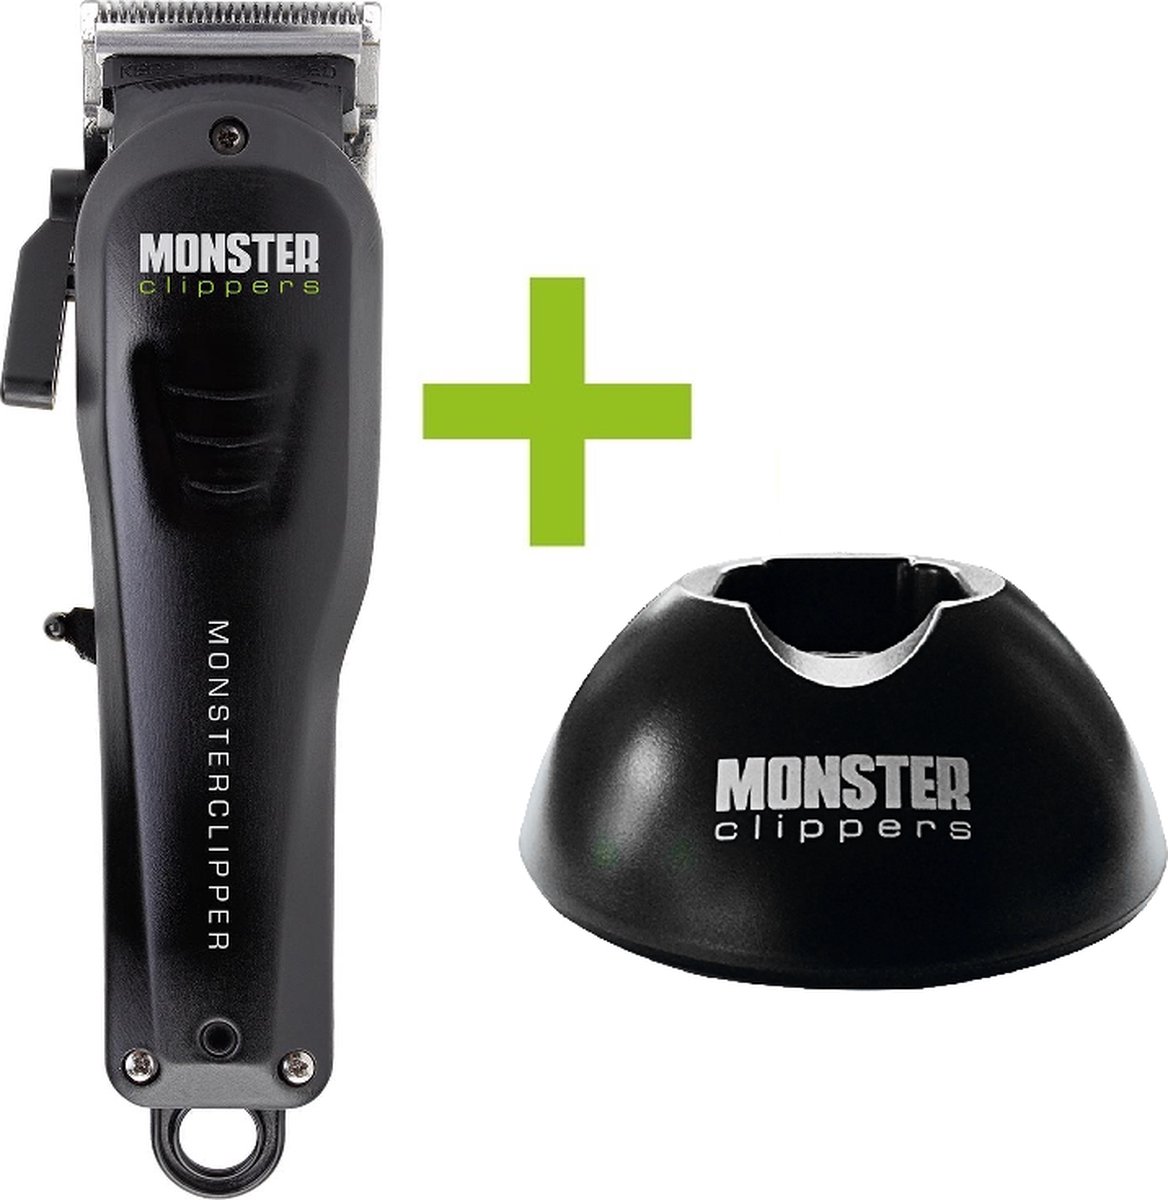 Monster Clippers Monsterclipper Fade Blade + Laadstandaard - Professionele Tondeuse - Draadloos - 6.500RPM